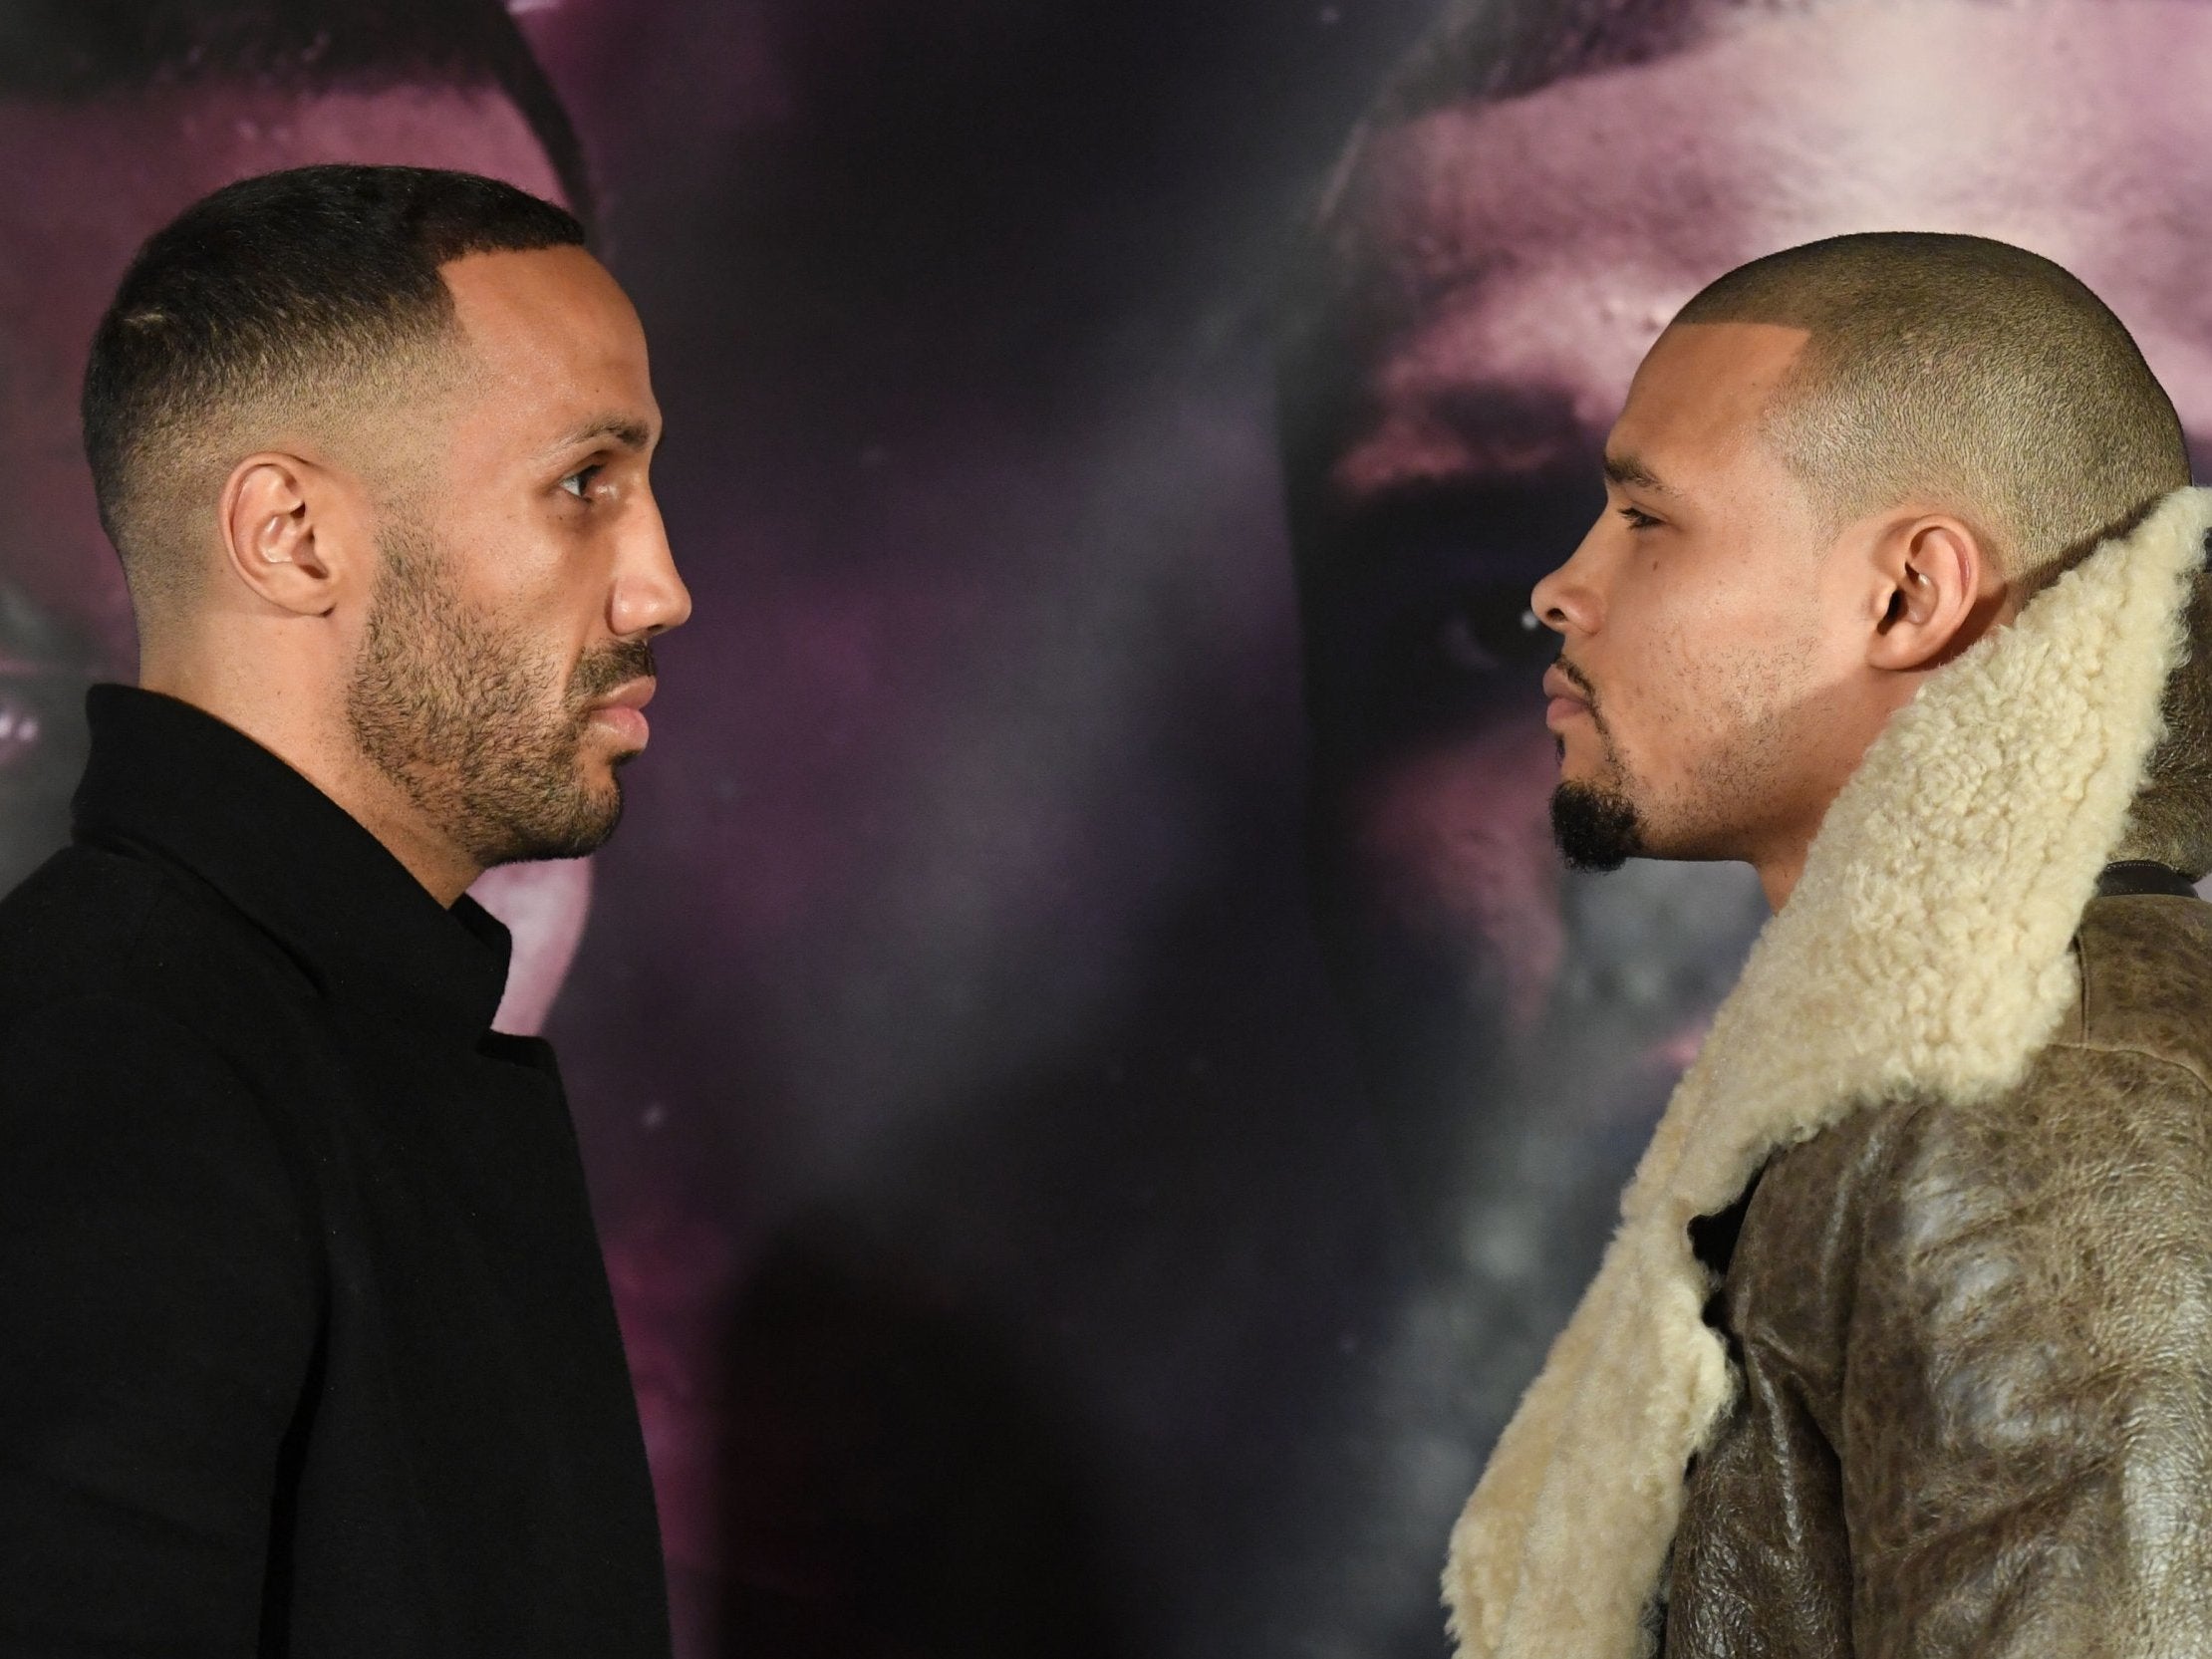 James DeGale and Chris Eubank Jr during a press conference